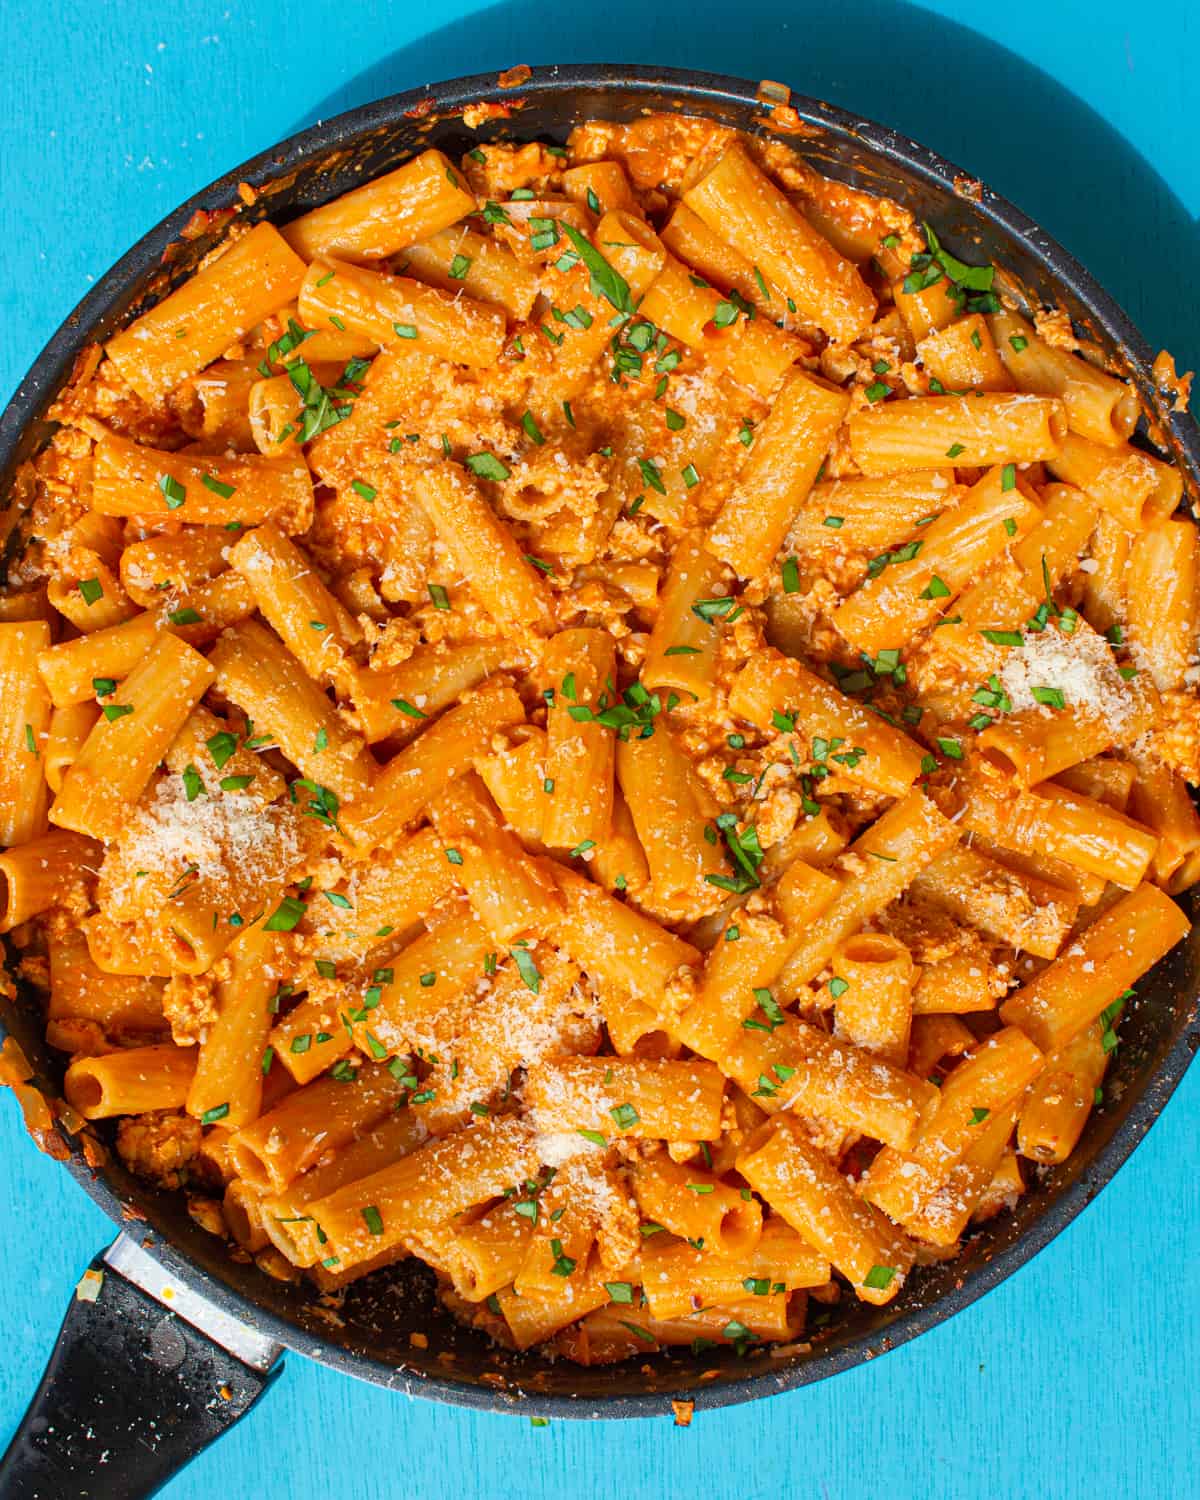 Carbone Spicy Rigatoni Vodka - Dining With Skyler % %